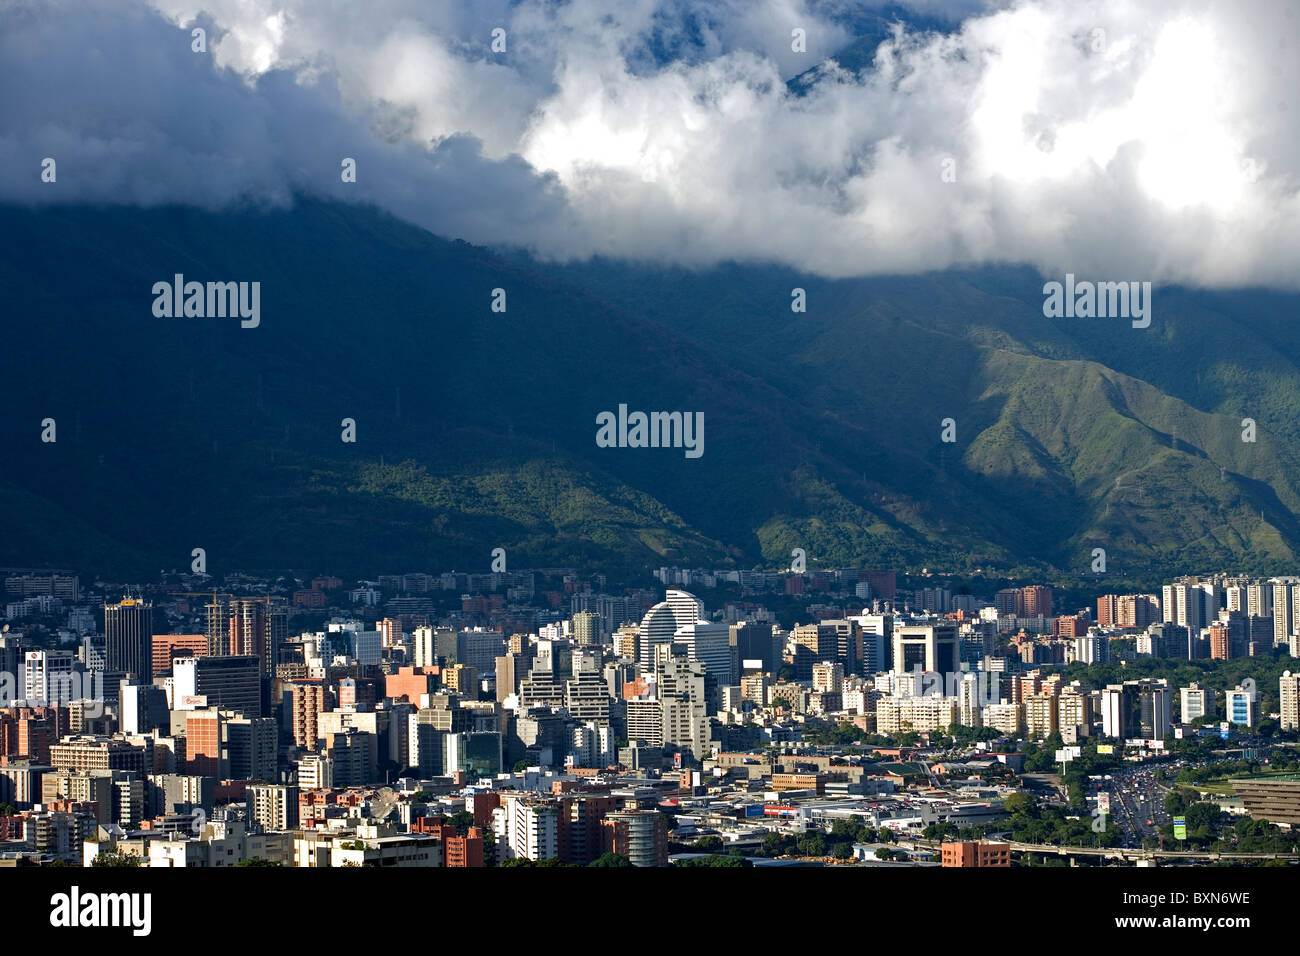 Overview of the Venezuelan capital, Caracas, at the base of Avila mountain covered by clouds, Venezuela, July 25, 2008. Stock Photo